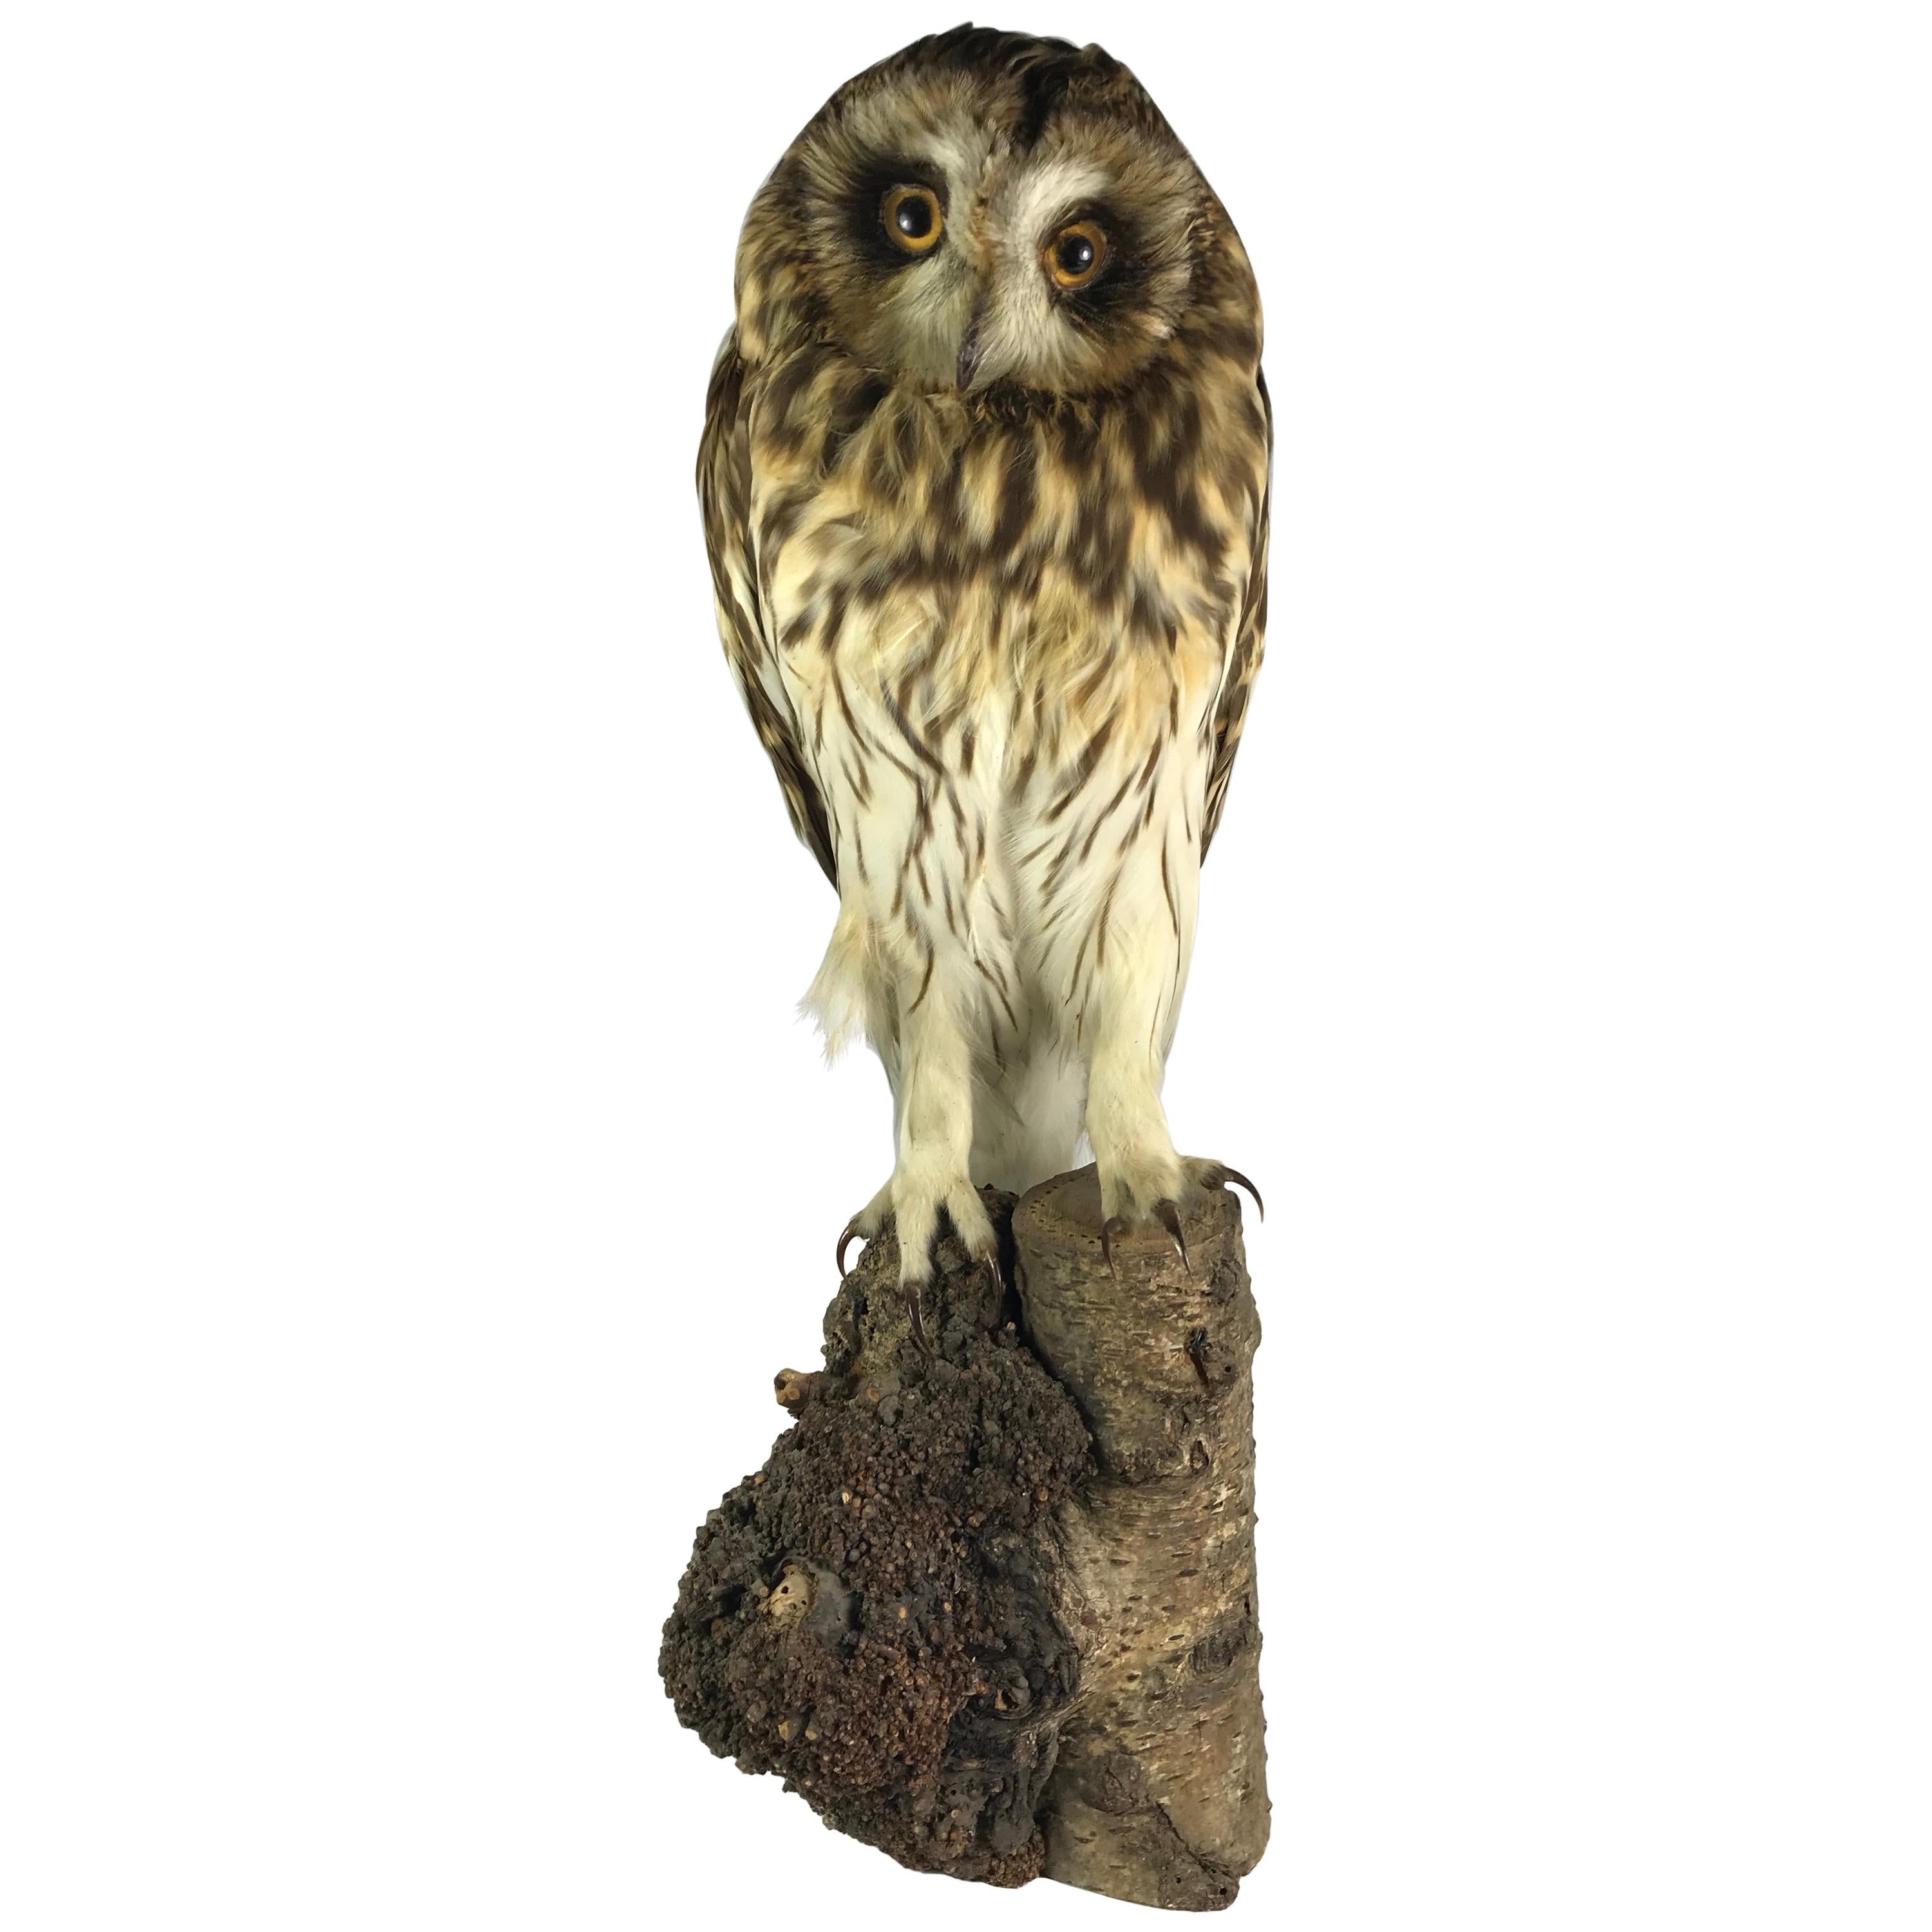 Tawny or Wood Owl For Sale